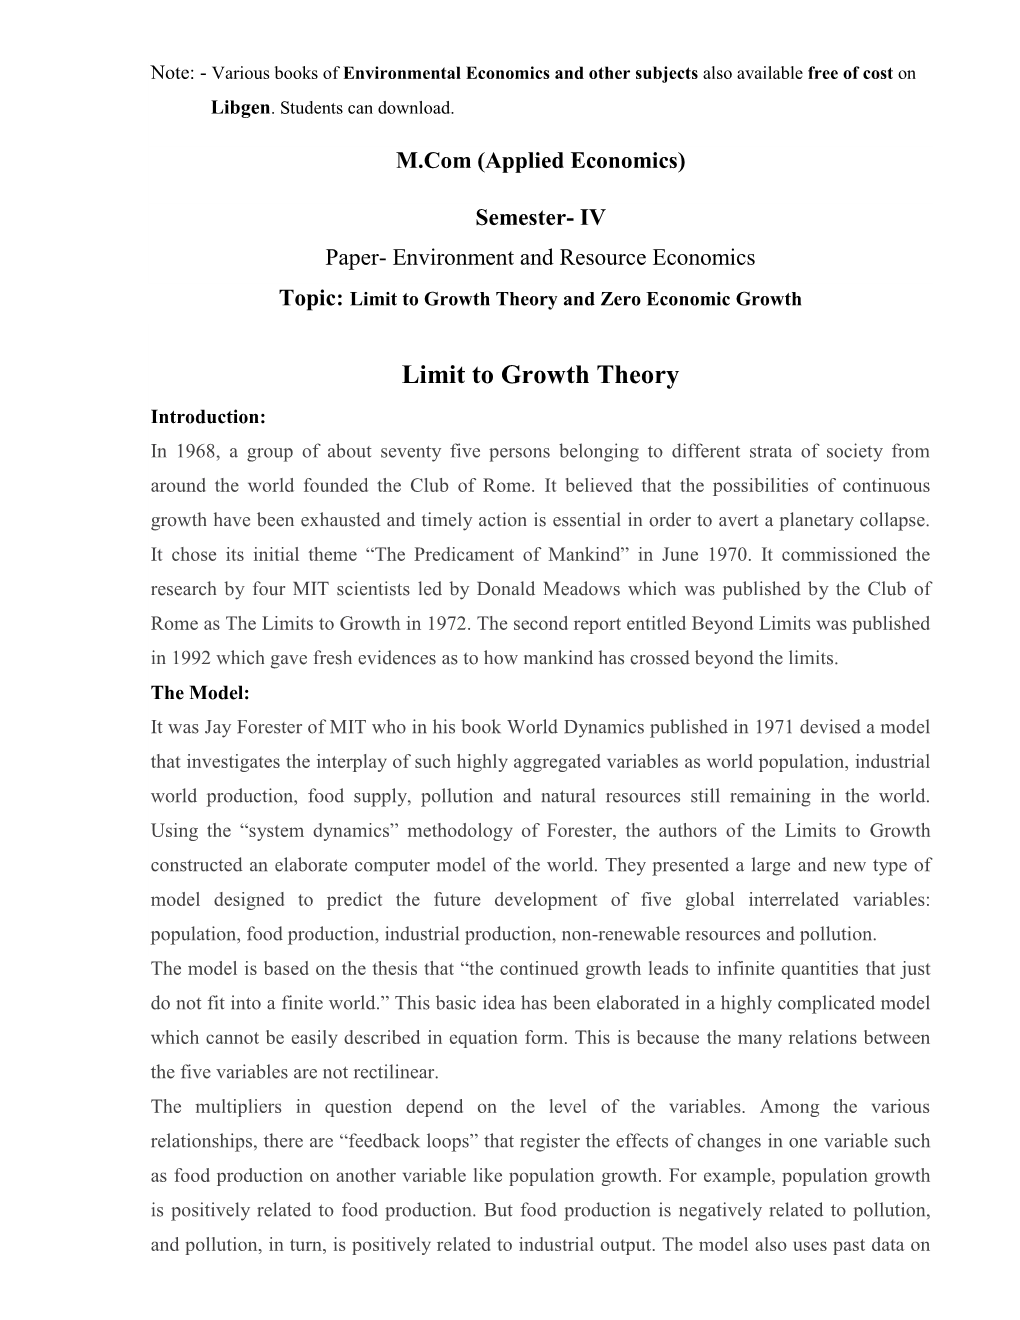 Limit to Growth Theory and Zero Economic Growth